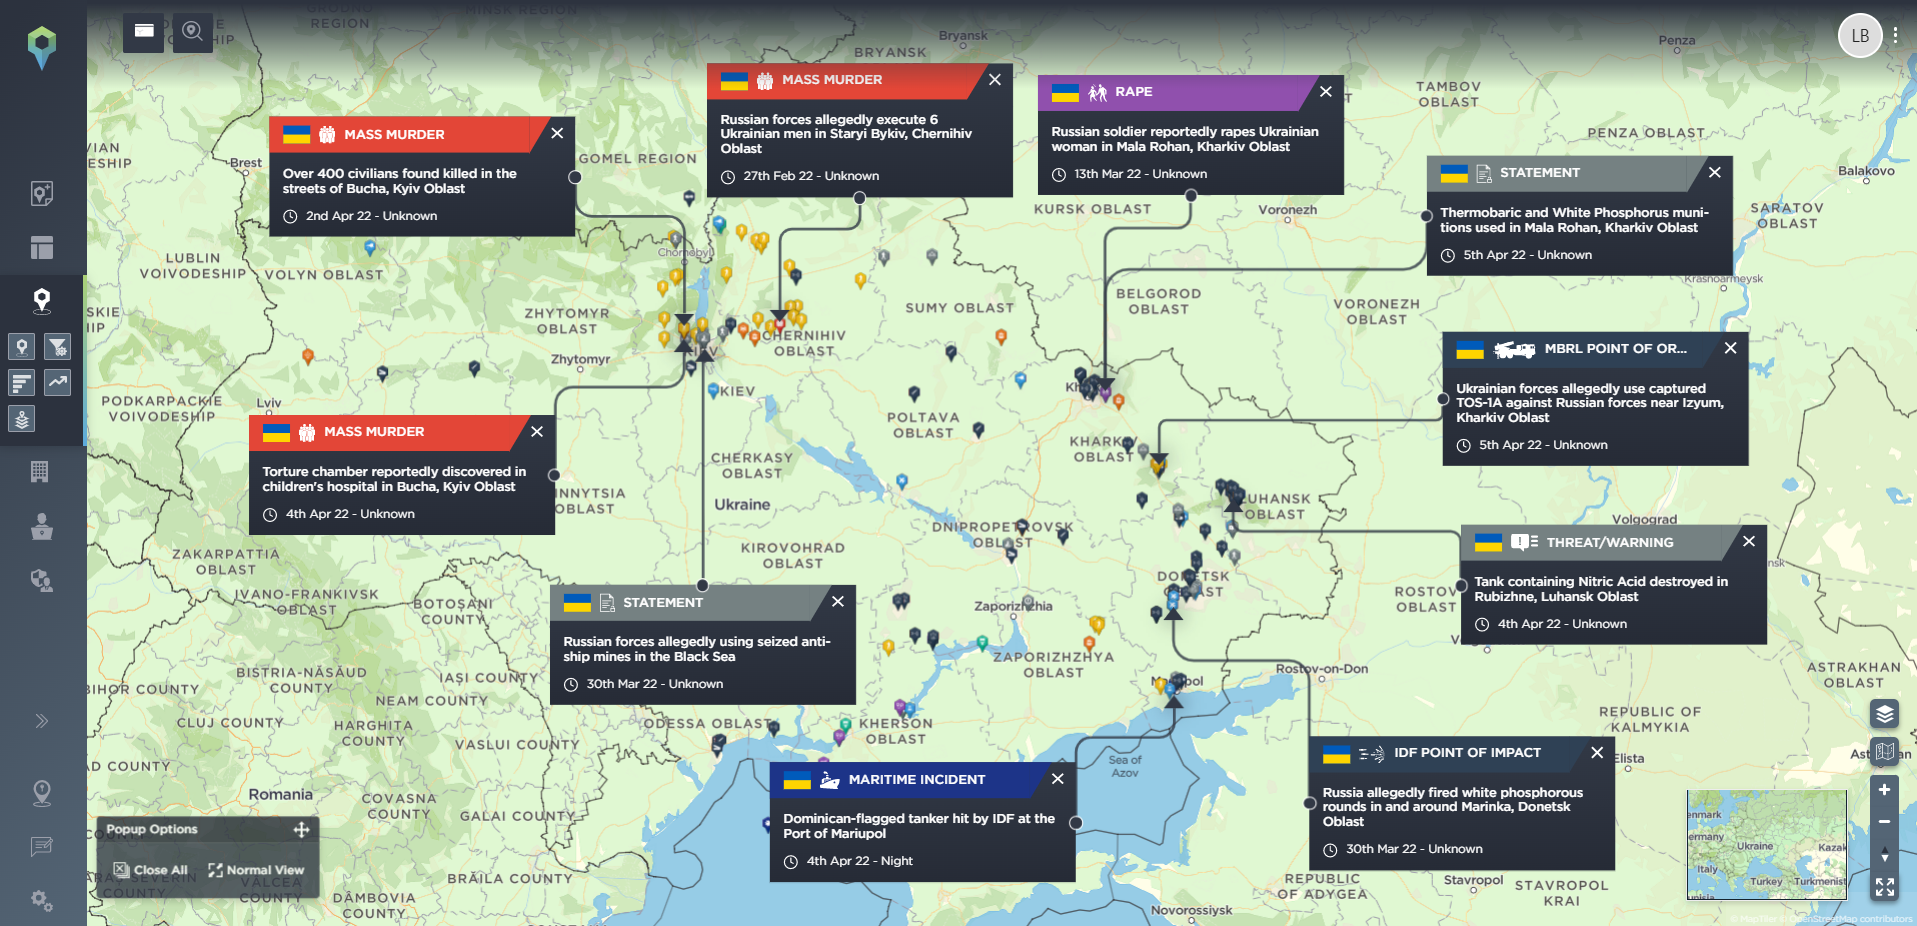 Significant incidents across Ukraine between the 6th and 13th April 2022.